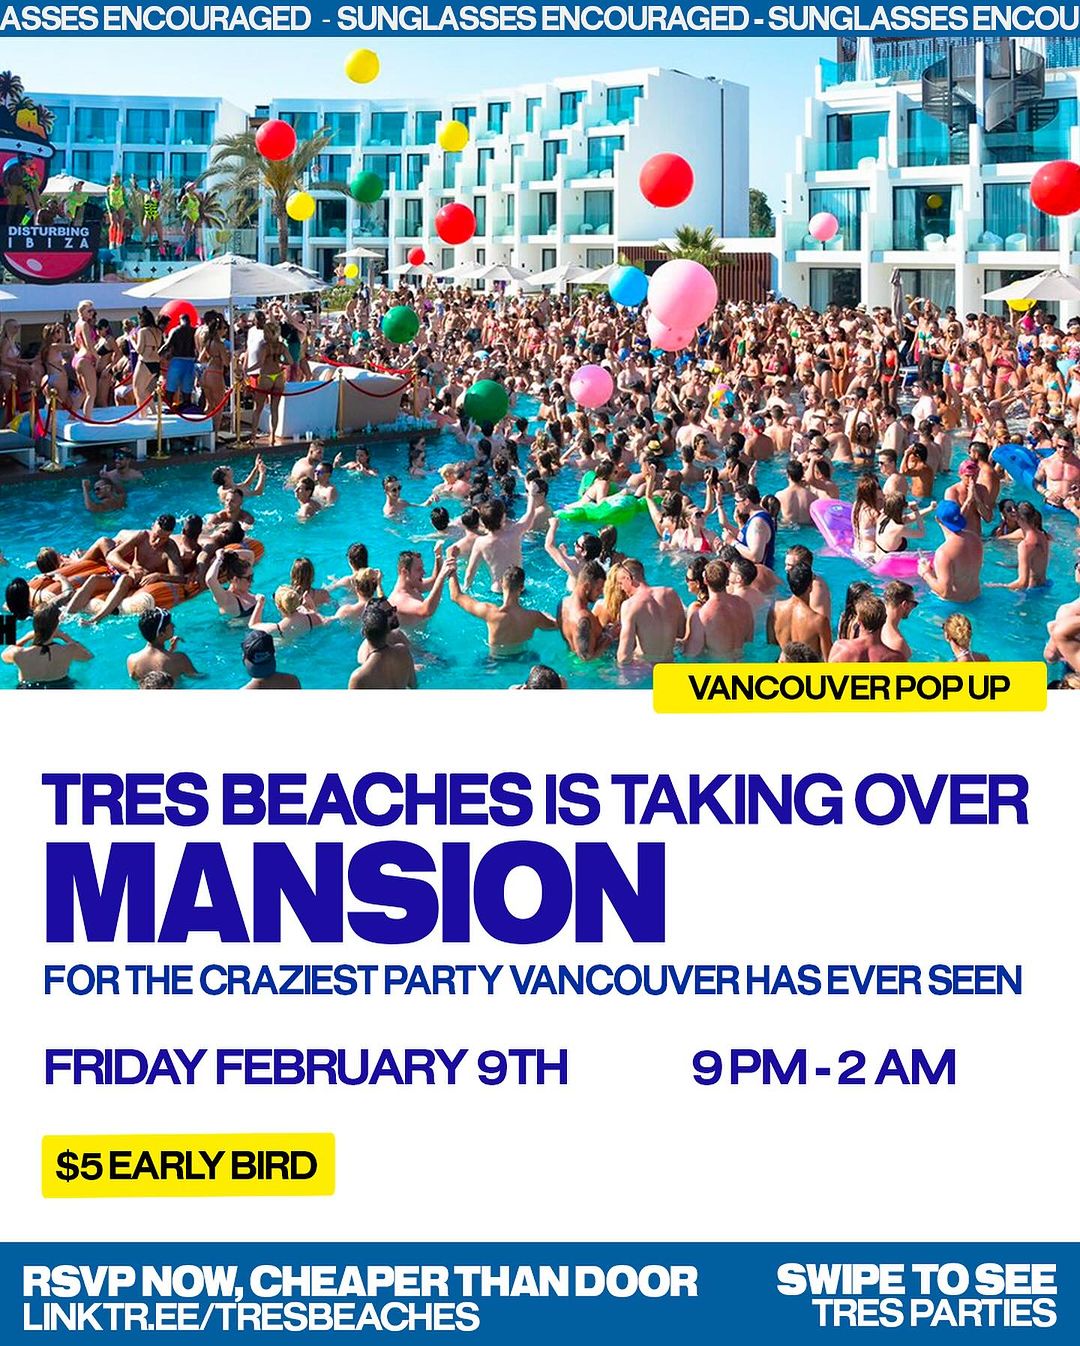 https://www.eventbrite.ca/e/tres-beaches-vancouver-pop-up-party-mansion-night-club-tickets-819207199787?aff=oddtdtcreator